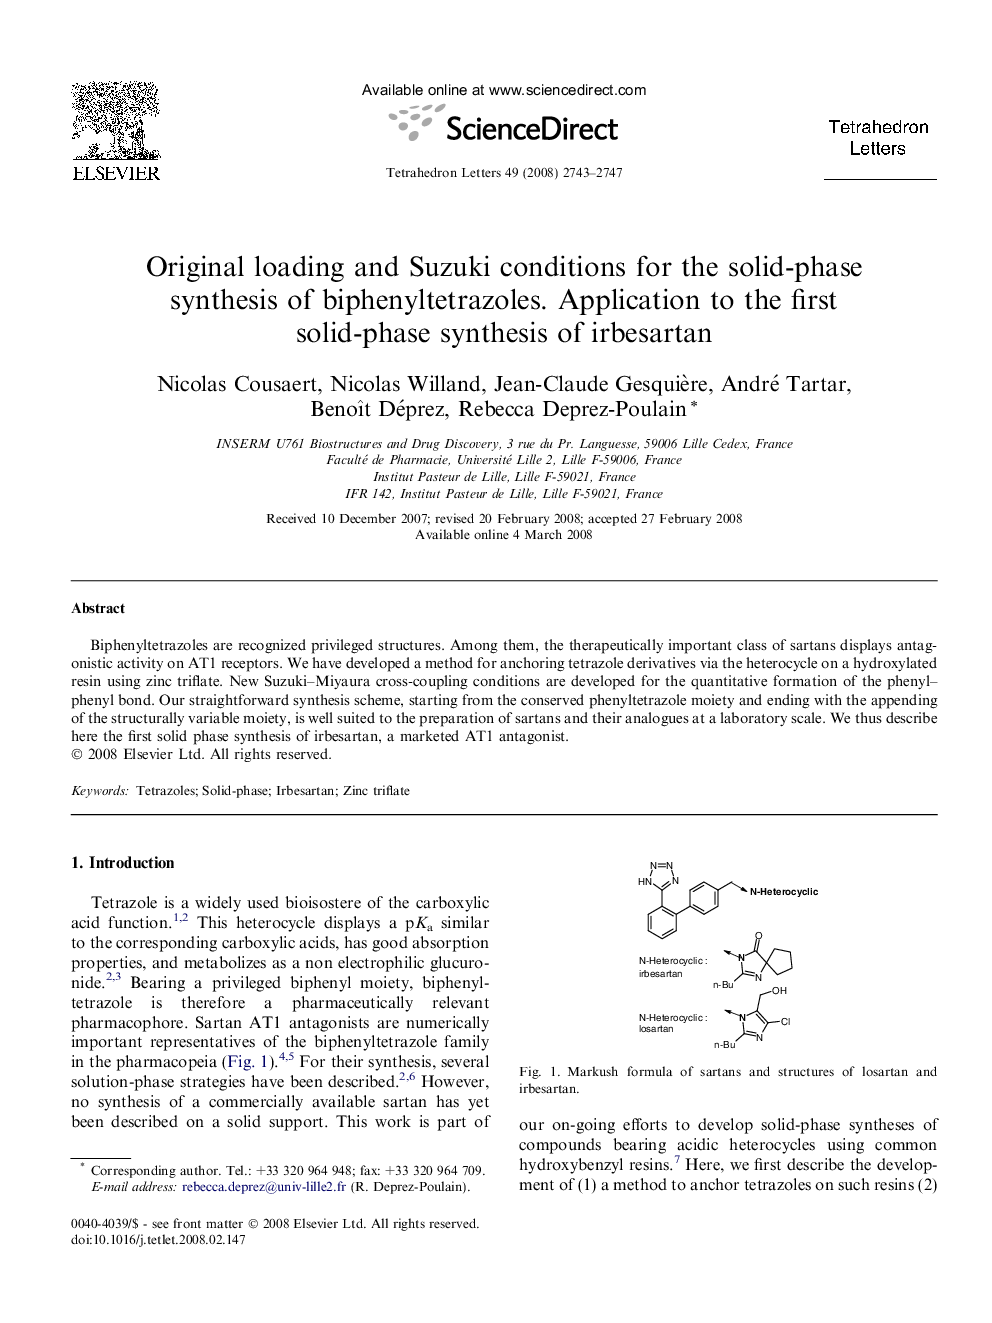 Original loading and Suzuki conditions for the solid-phase synthesis of biphenyltetrazoles. Application to the first solid-phase synthesis of irbesartan